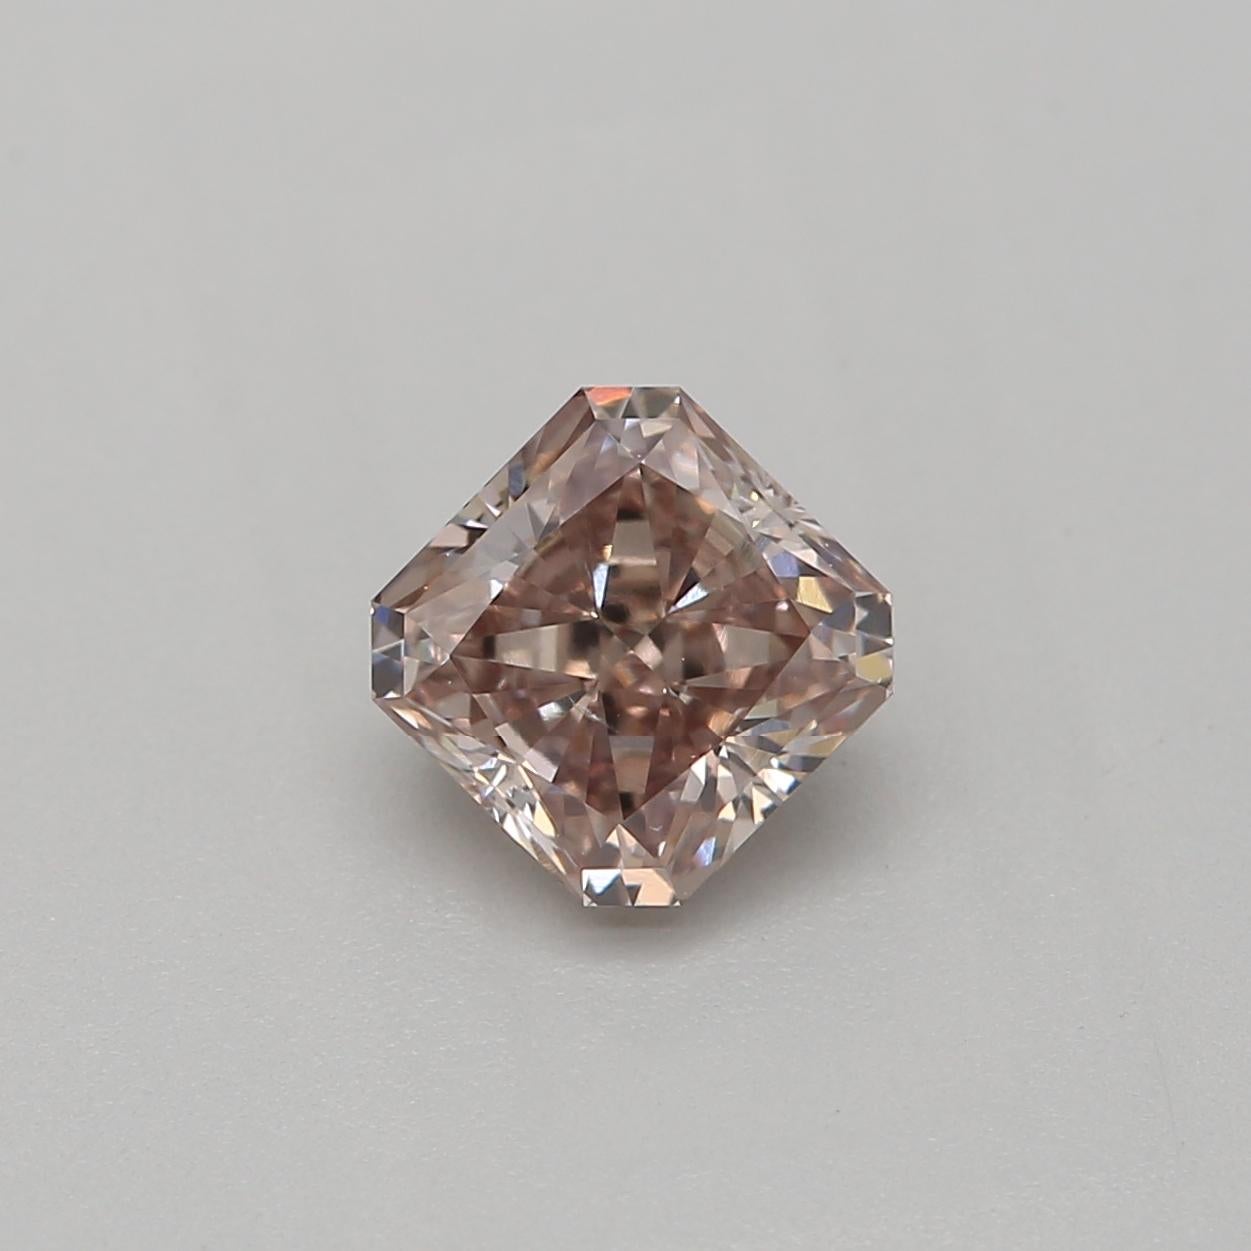 *100% NATURAL FANCY COLOUR DIAMOND*

✪ Diamond Details ✪

➛ Shape: Radiant
➛ Colour Grade: Fancy Pink Brown
➛ Carat: 0.53
➛ Clarity: Si1
➛ GIA  Certified 

^FEATURES OF THE DIAMOND^

Our radiant shape diamond combines the elegance of the emerald cut